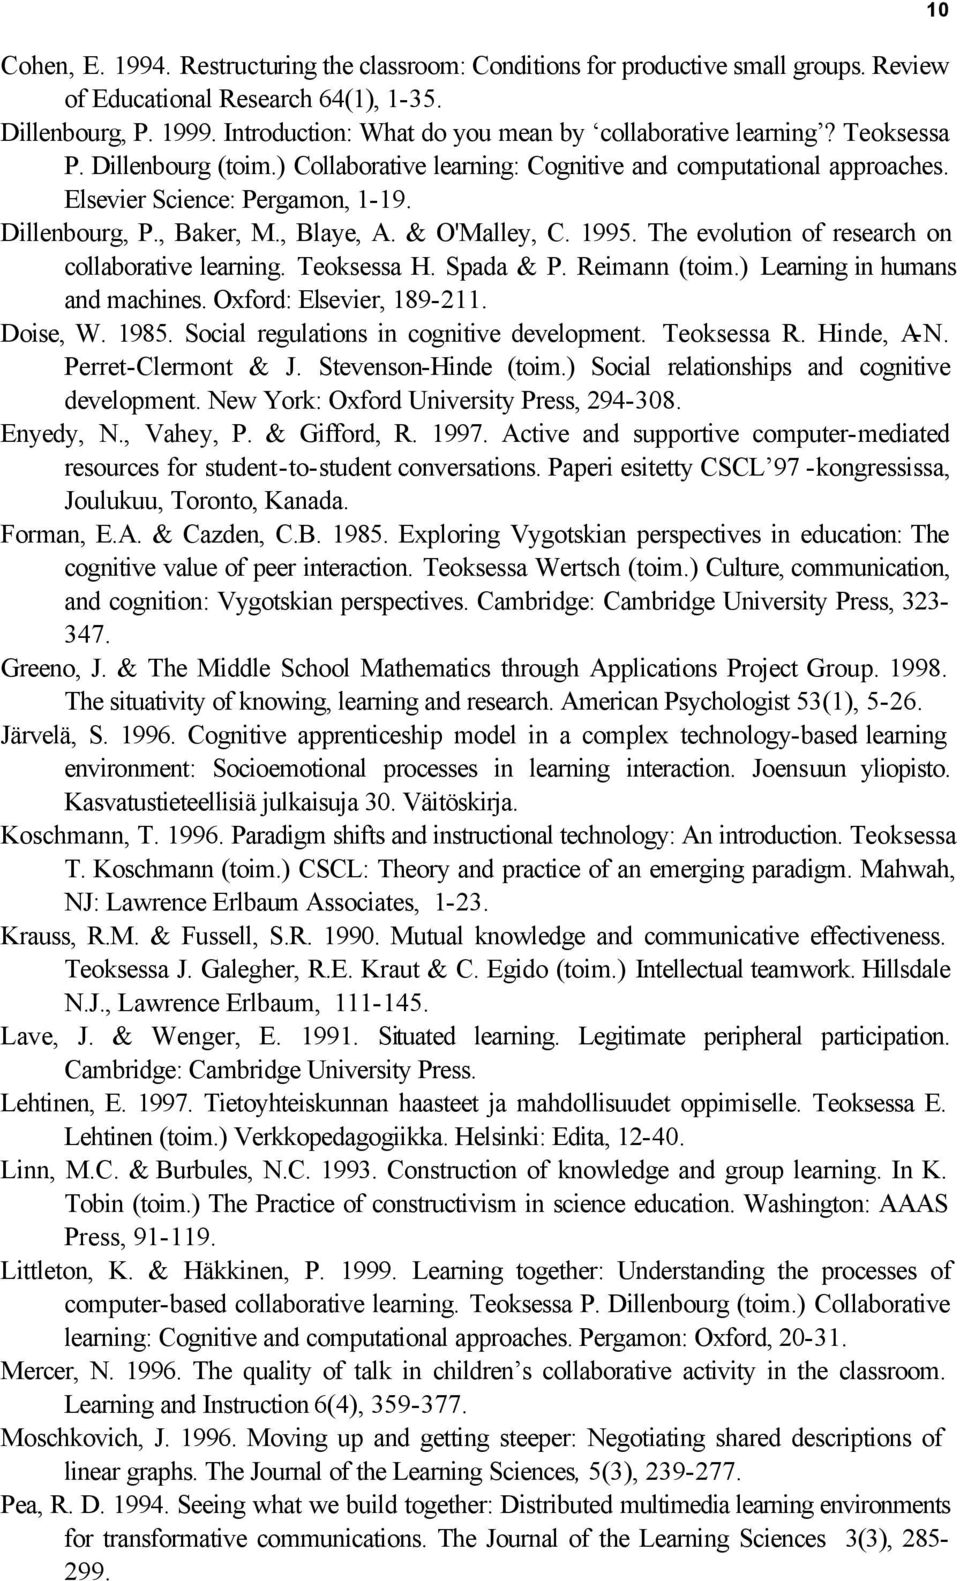 Dillenbourg, P., Baker, M., Blaye, A. & O'Malley, C. 1995. The evolution of research on collaborative learning. Teoksessa H. Spada & P. Reimann (toim.) Learning in humans and machines.